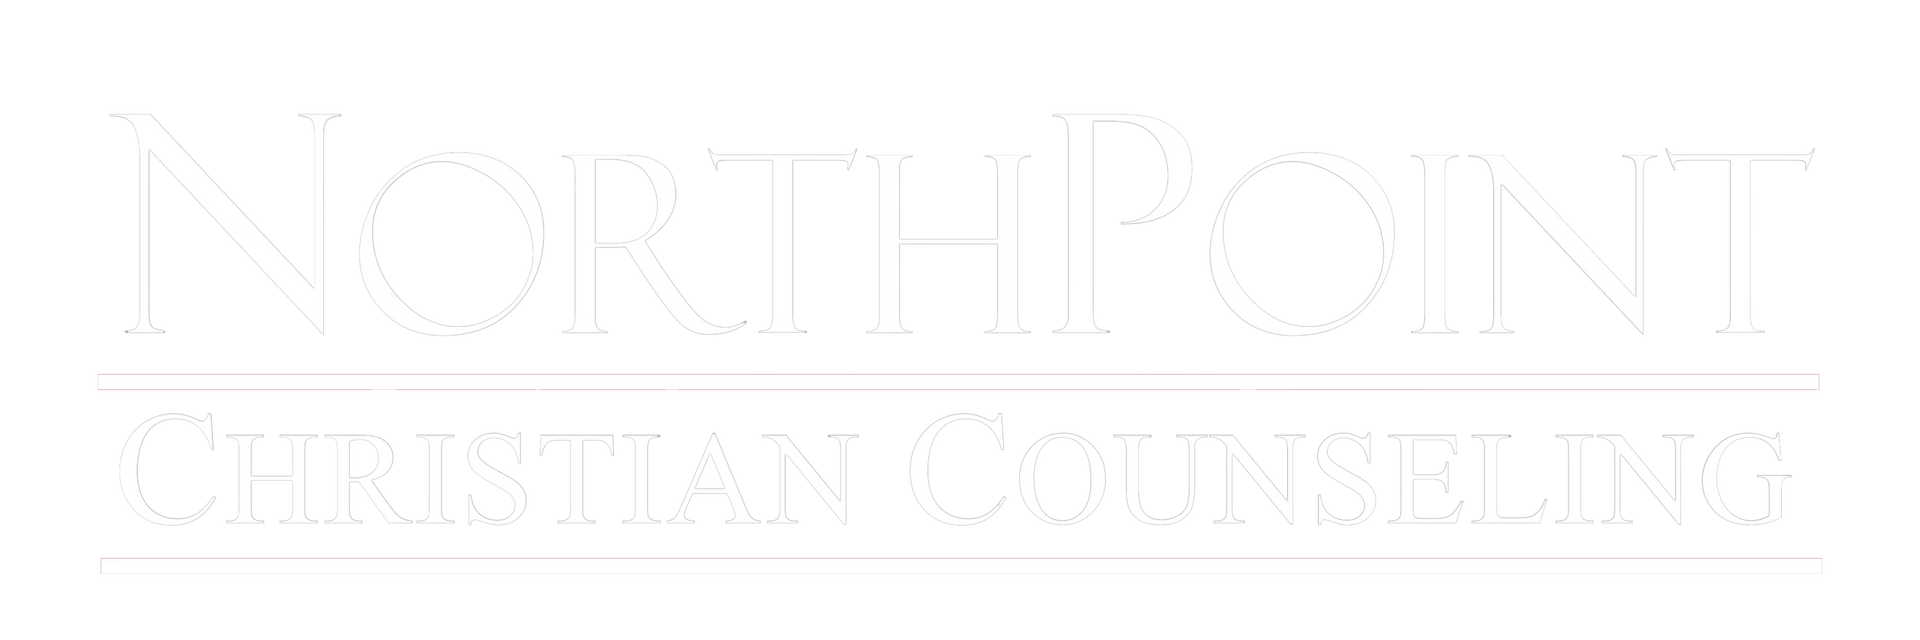 Northpoint Christian Counseling | Solution based counseling